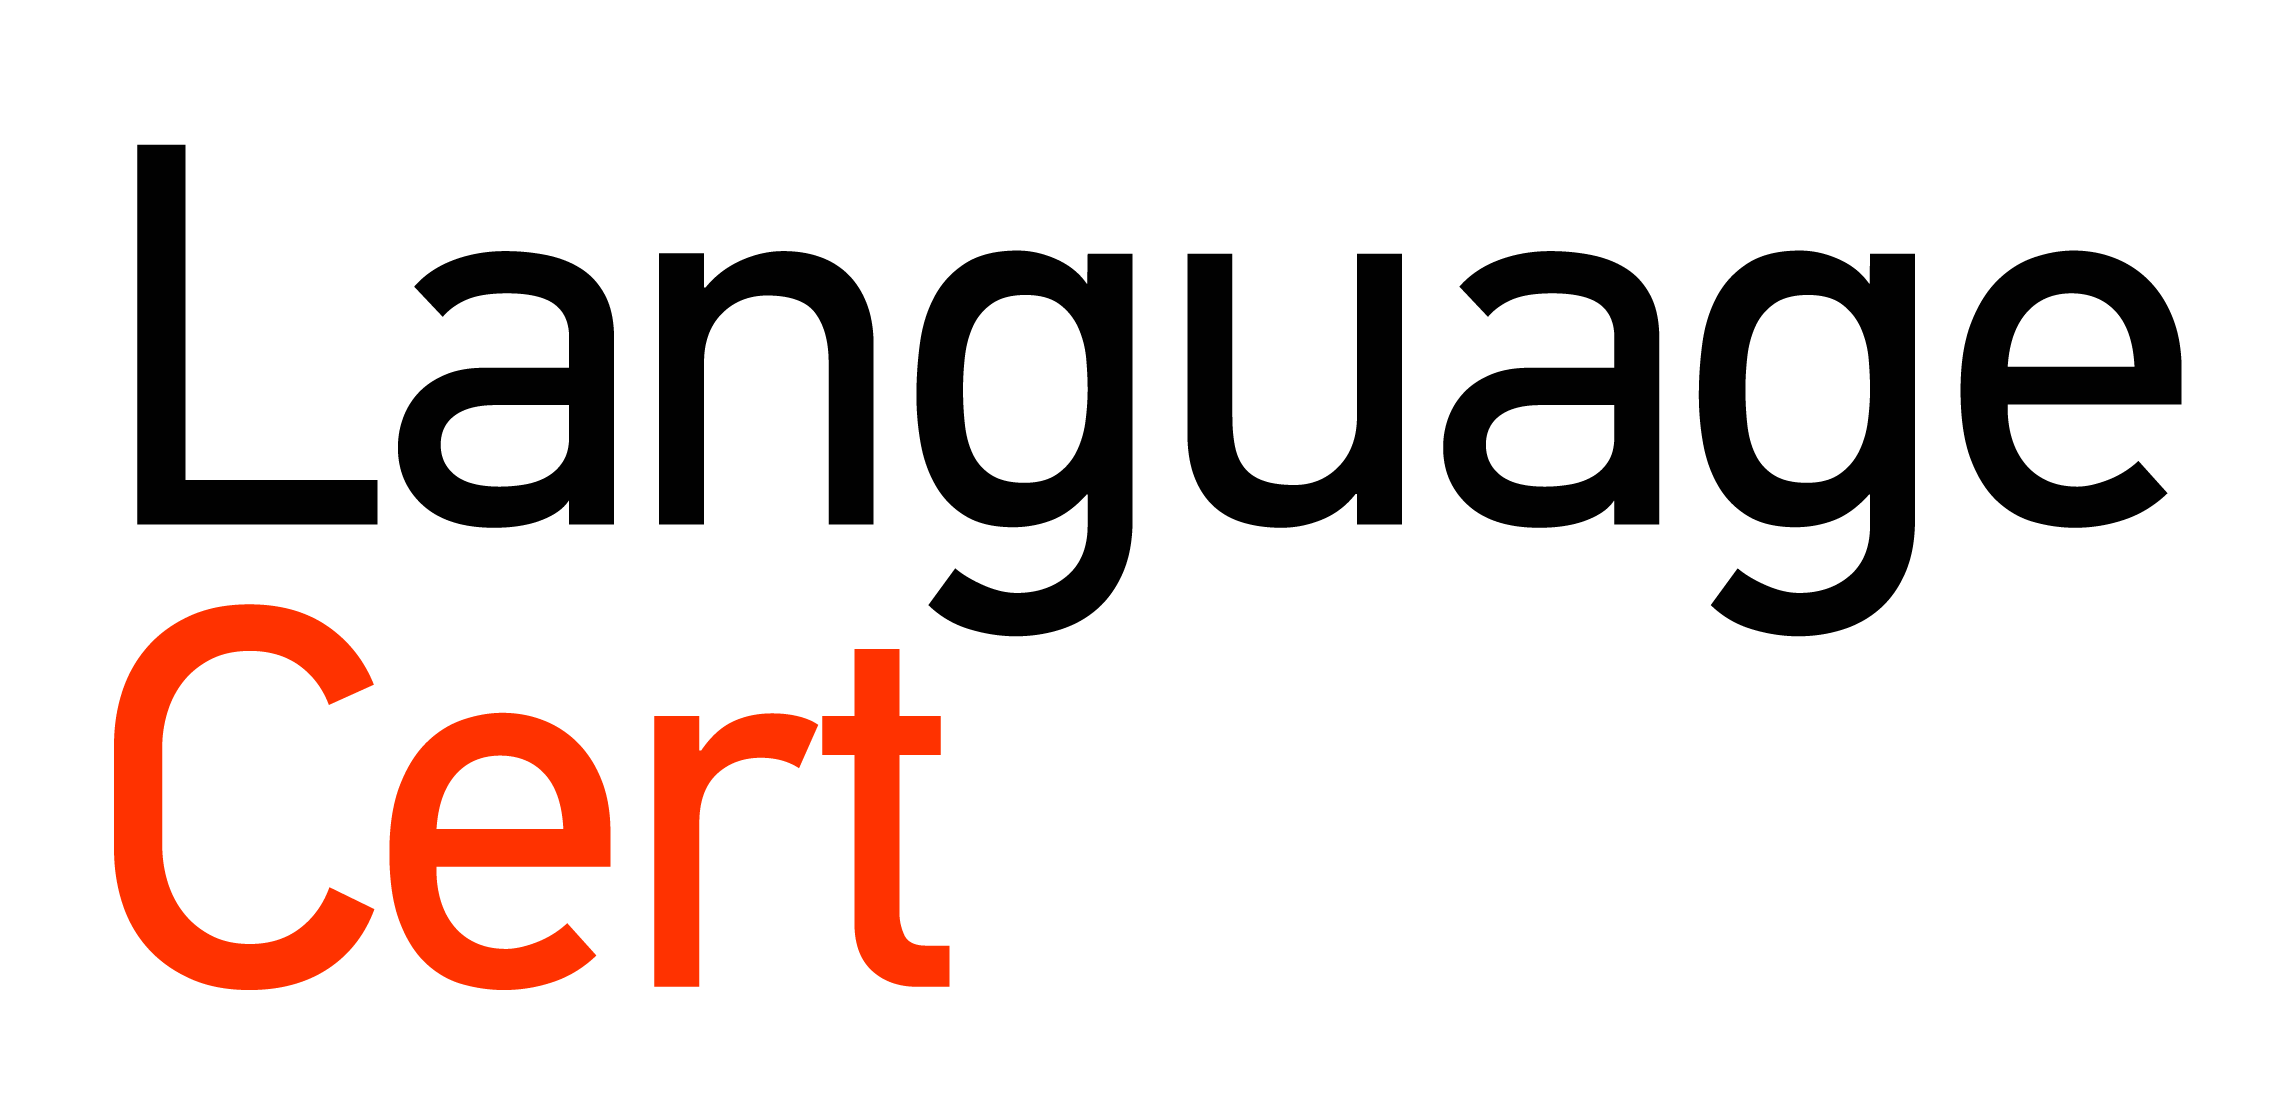 LanguageCert is a leading provider of English language assessments for people of all ages and needs. Our portfolio includes the International ESOL 4-skill exam which is accepted by institutions and government bodies as evidence of language proficiency in over 70 countries. As part of the PeopleCert group, we are pioneers in the delivery of secure online tests using live remote proctoring, enabling candidates to take their English test from any location worldwide.